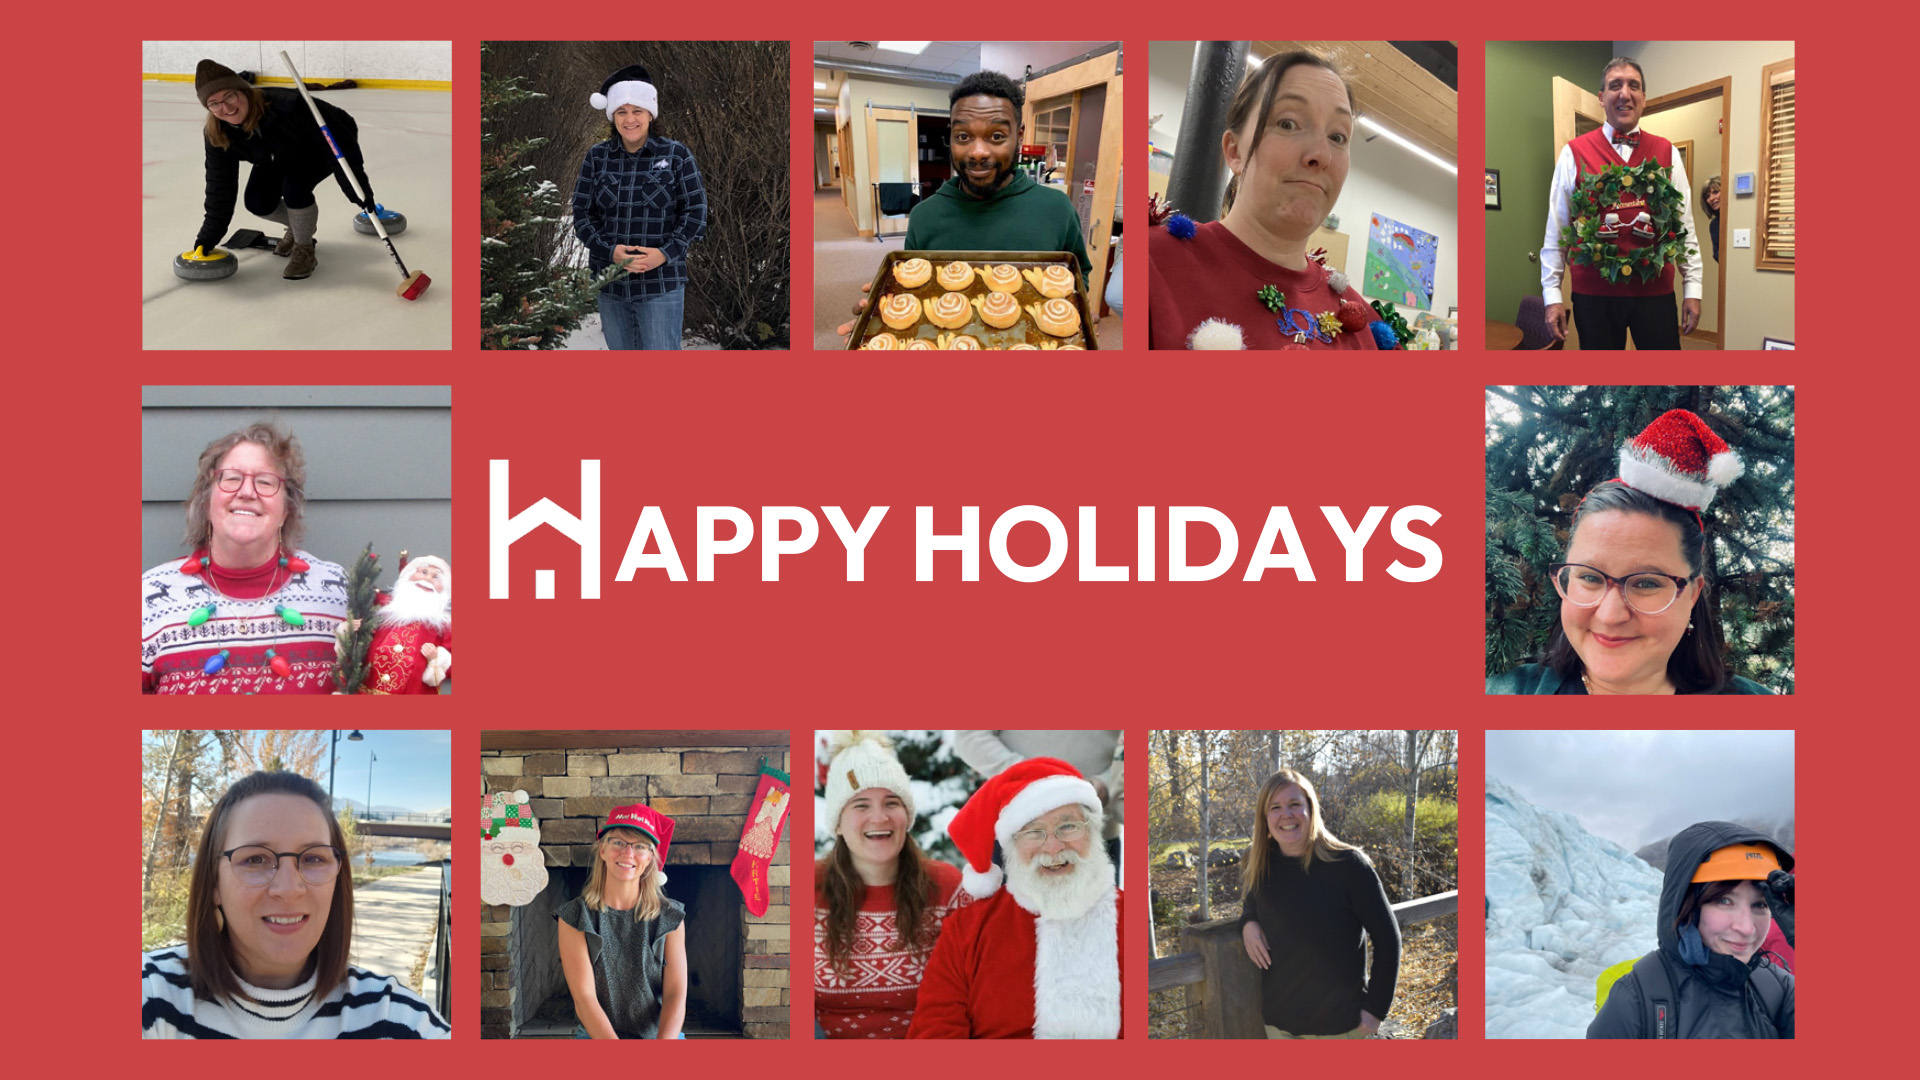 Happy holidays from Homeword staff in festive holiday attire